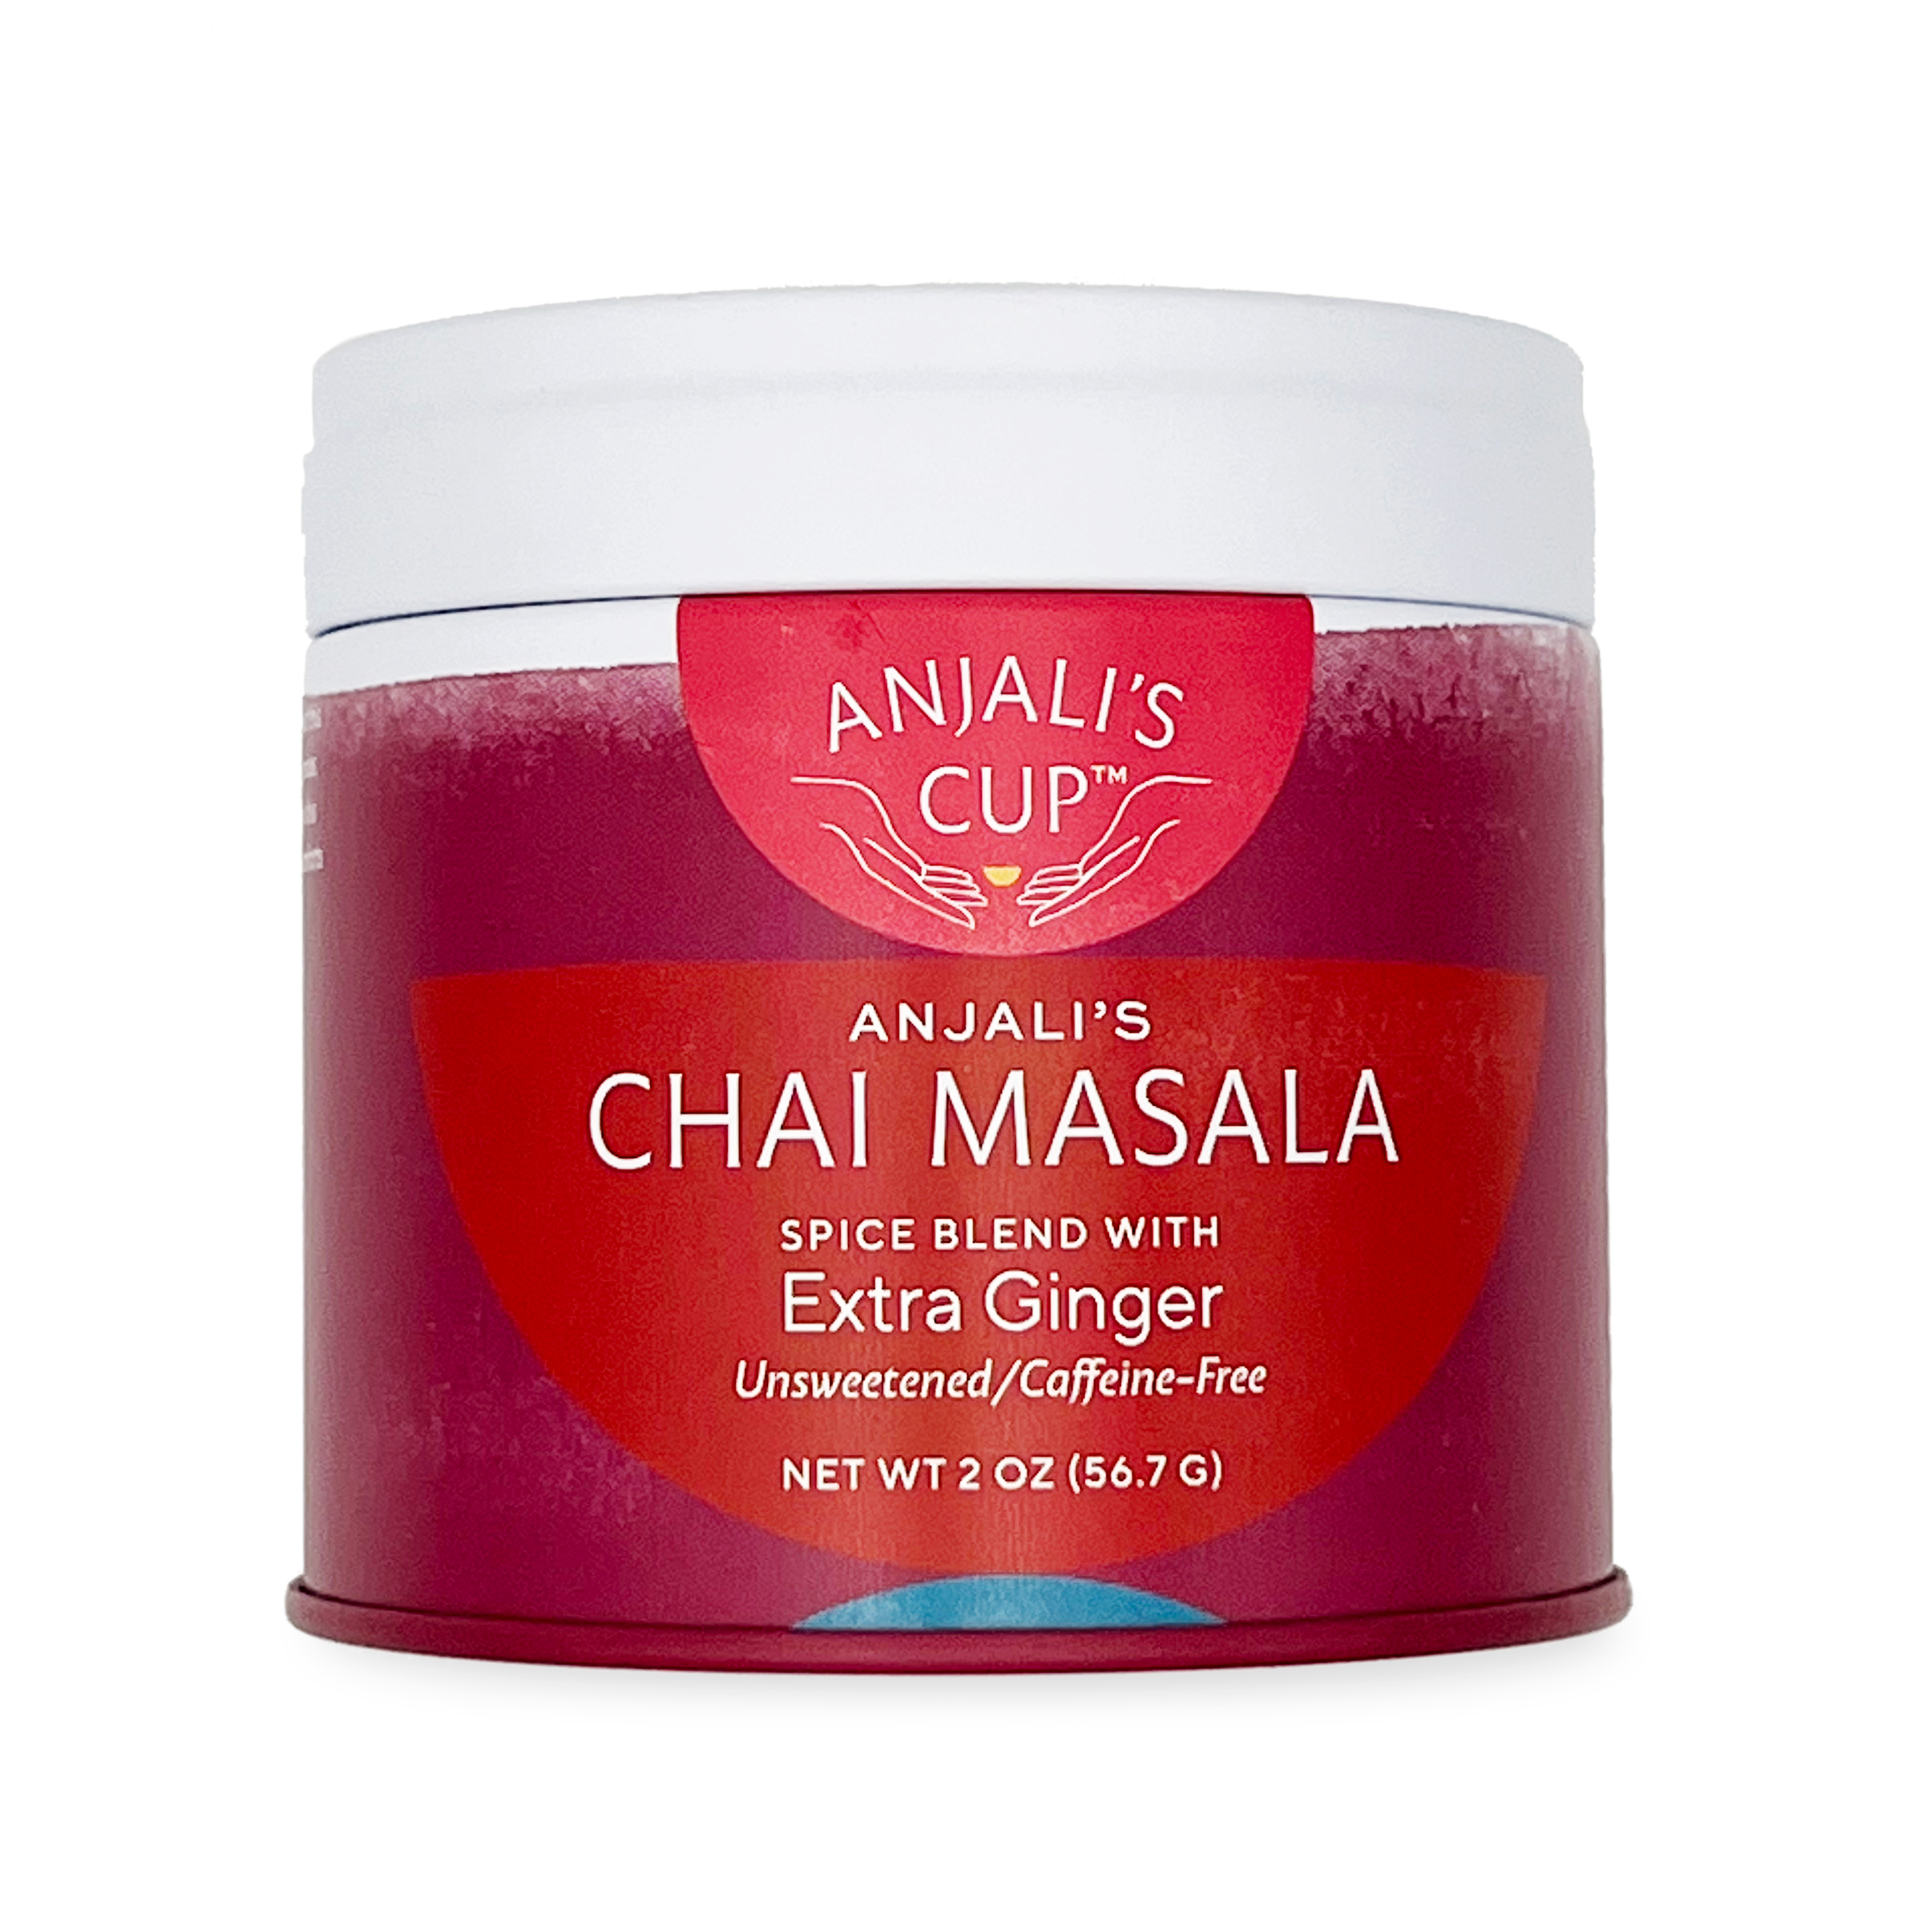 Anjali’s Chai Masala with Extra Ginger